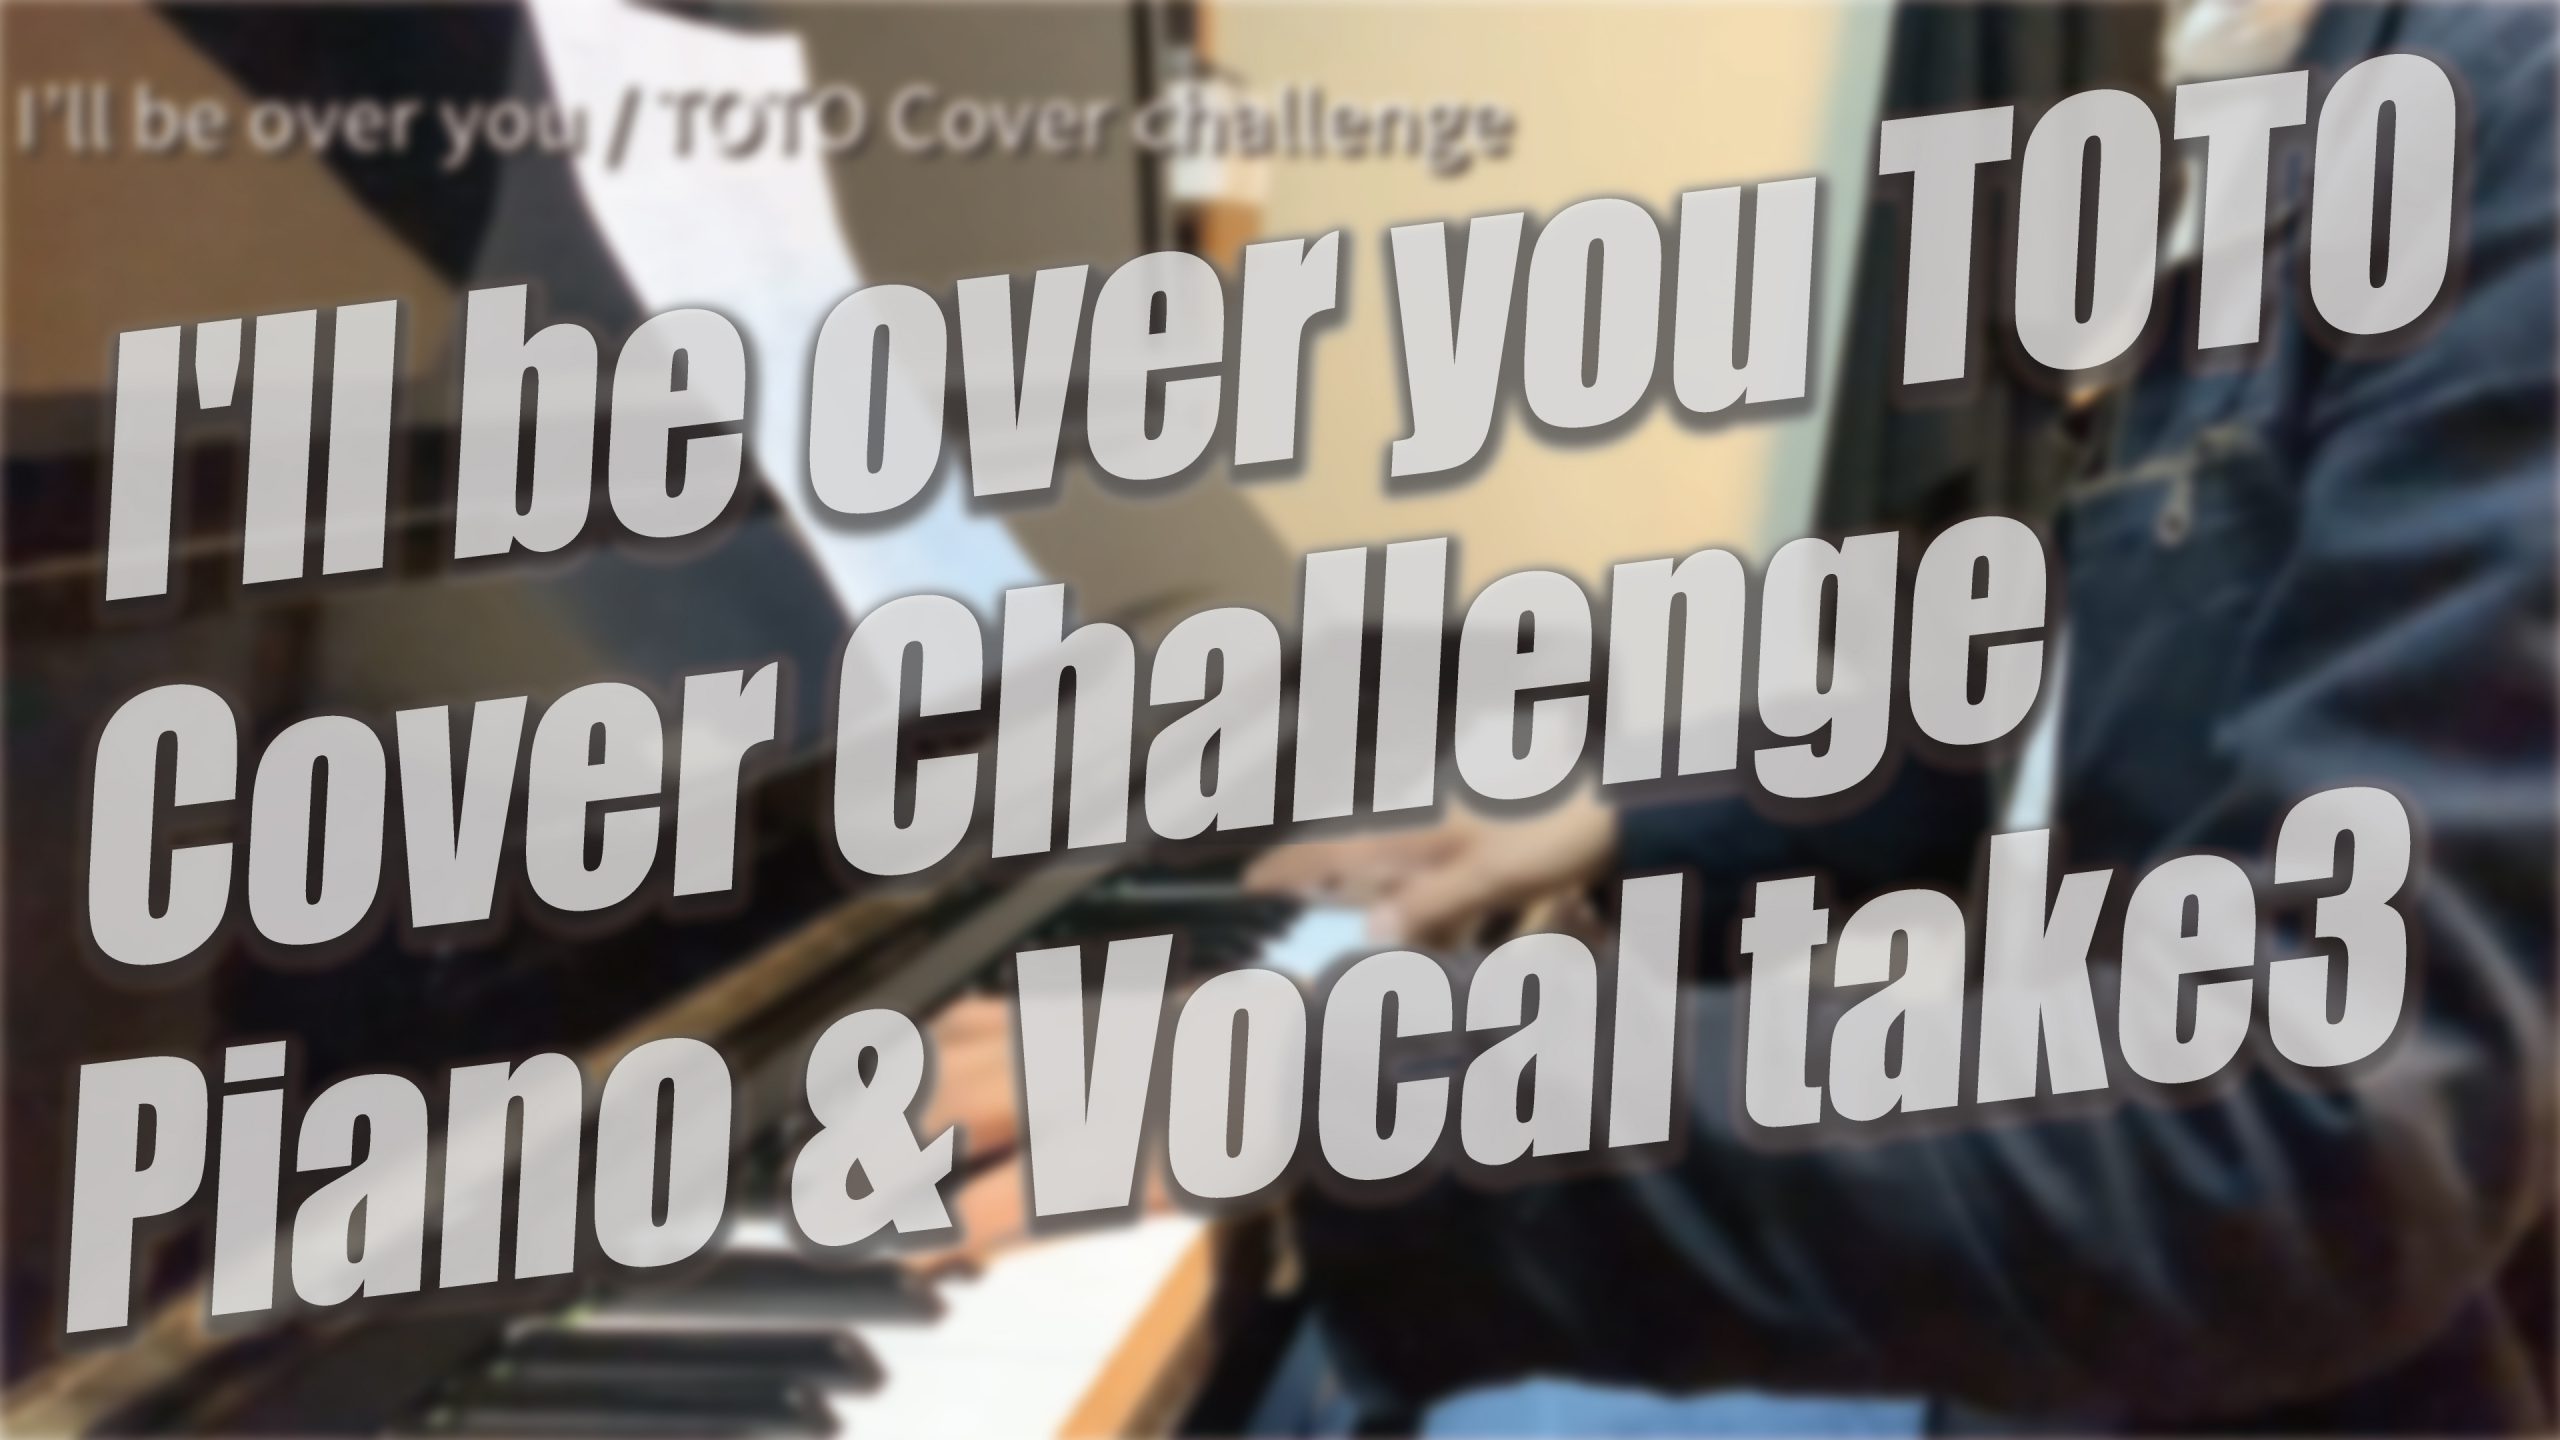 I’ll be over you / TOTO Piano Cover Challege！TAKE#3｜いきなりはやっぱできんなｗｗ　